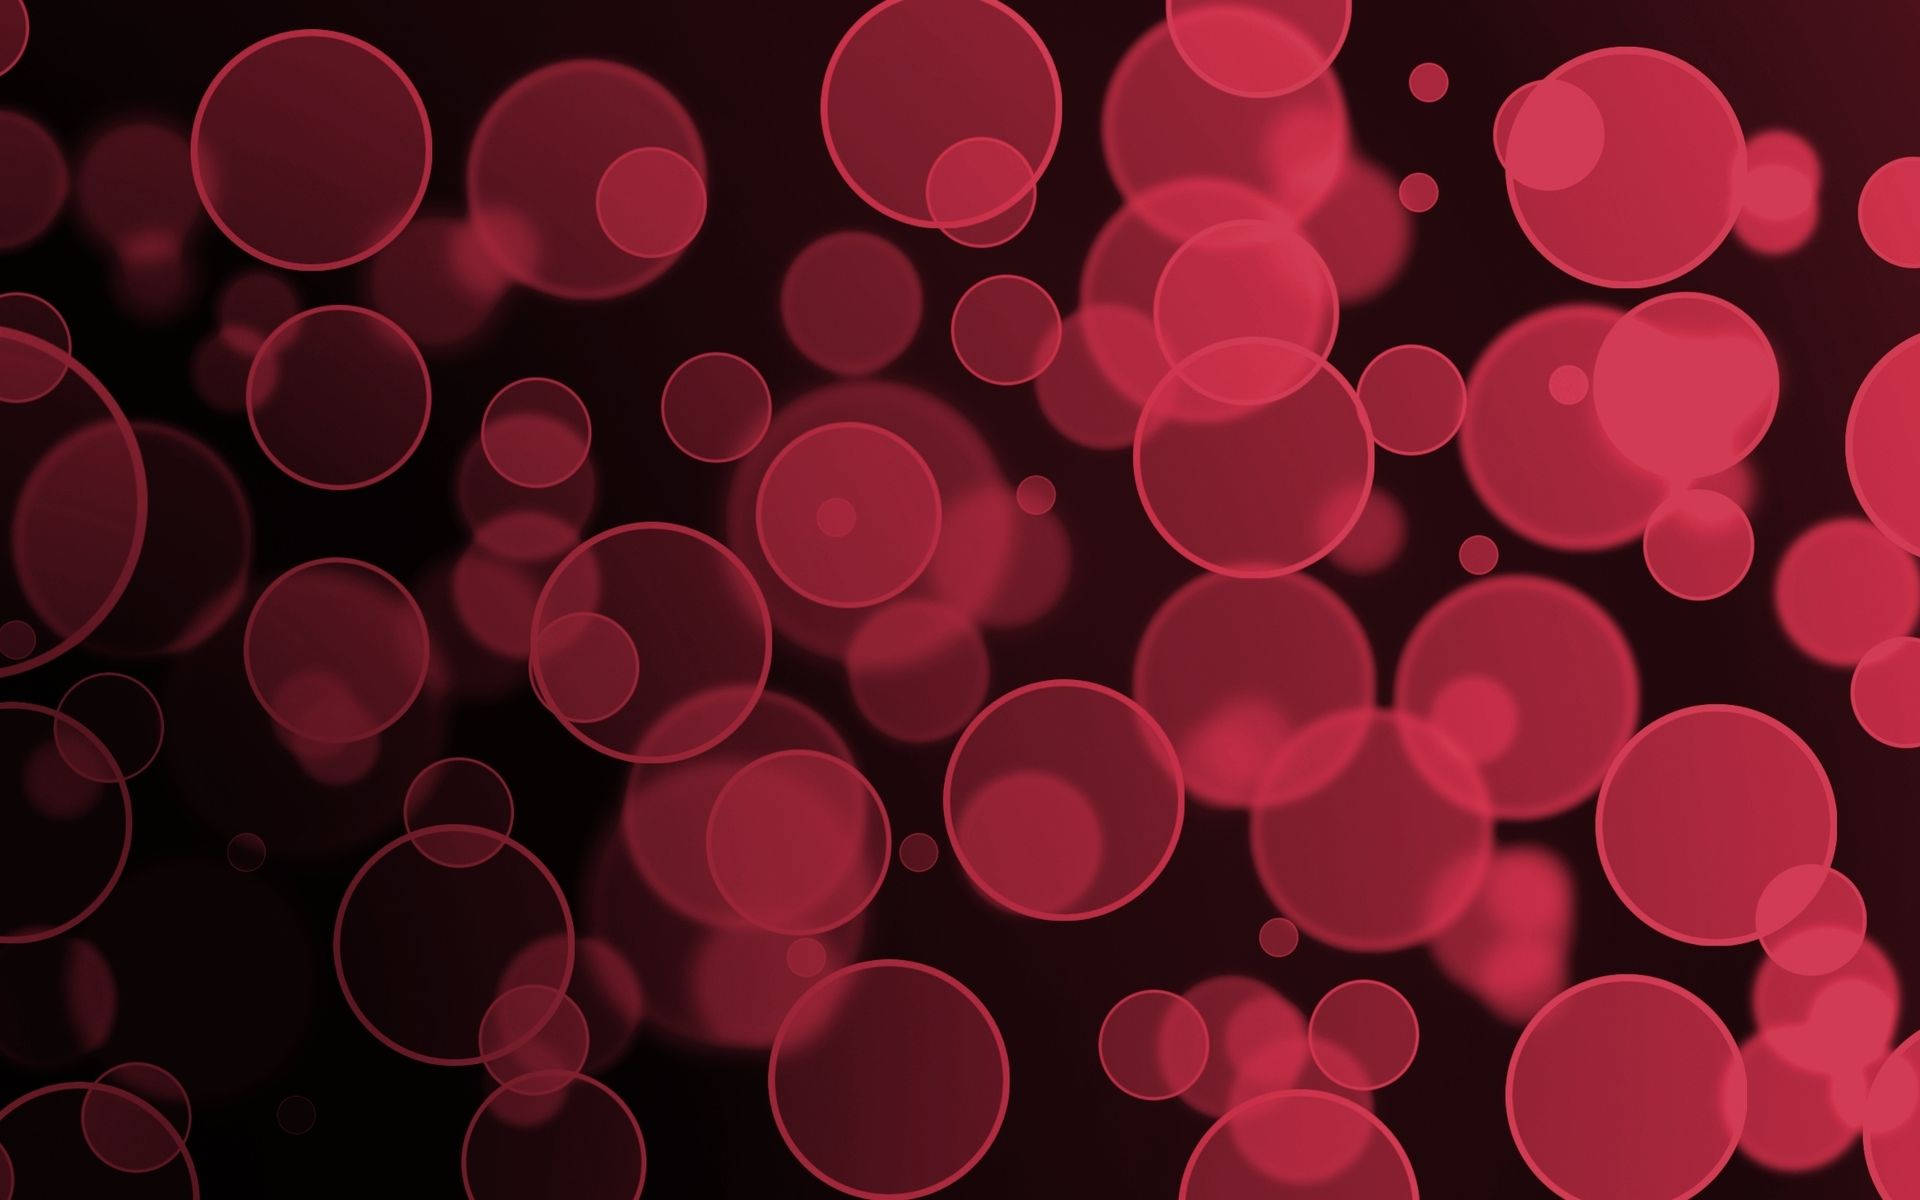 Red Circle Like Red Blood Cells Wallpaper